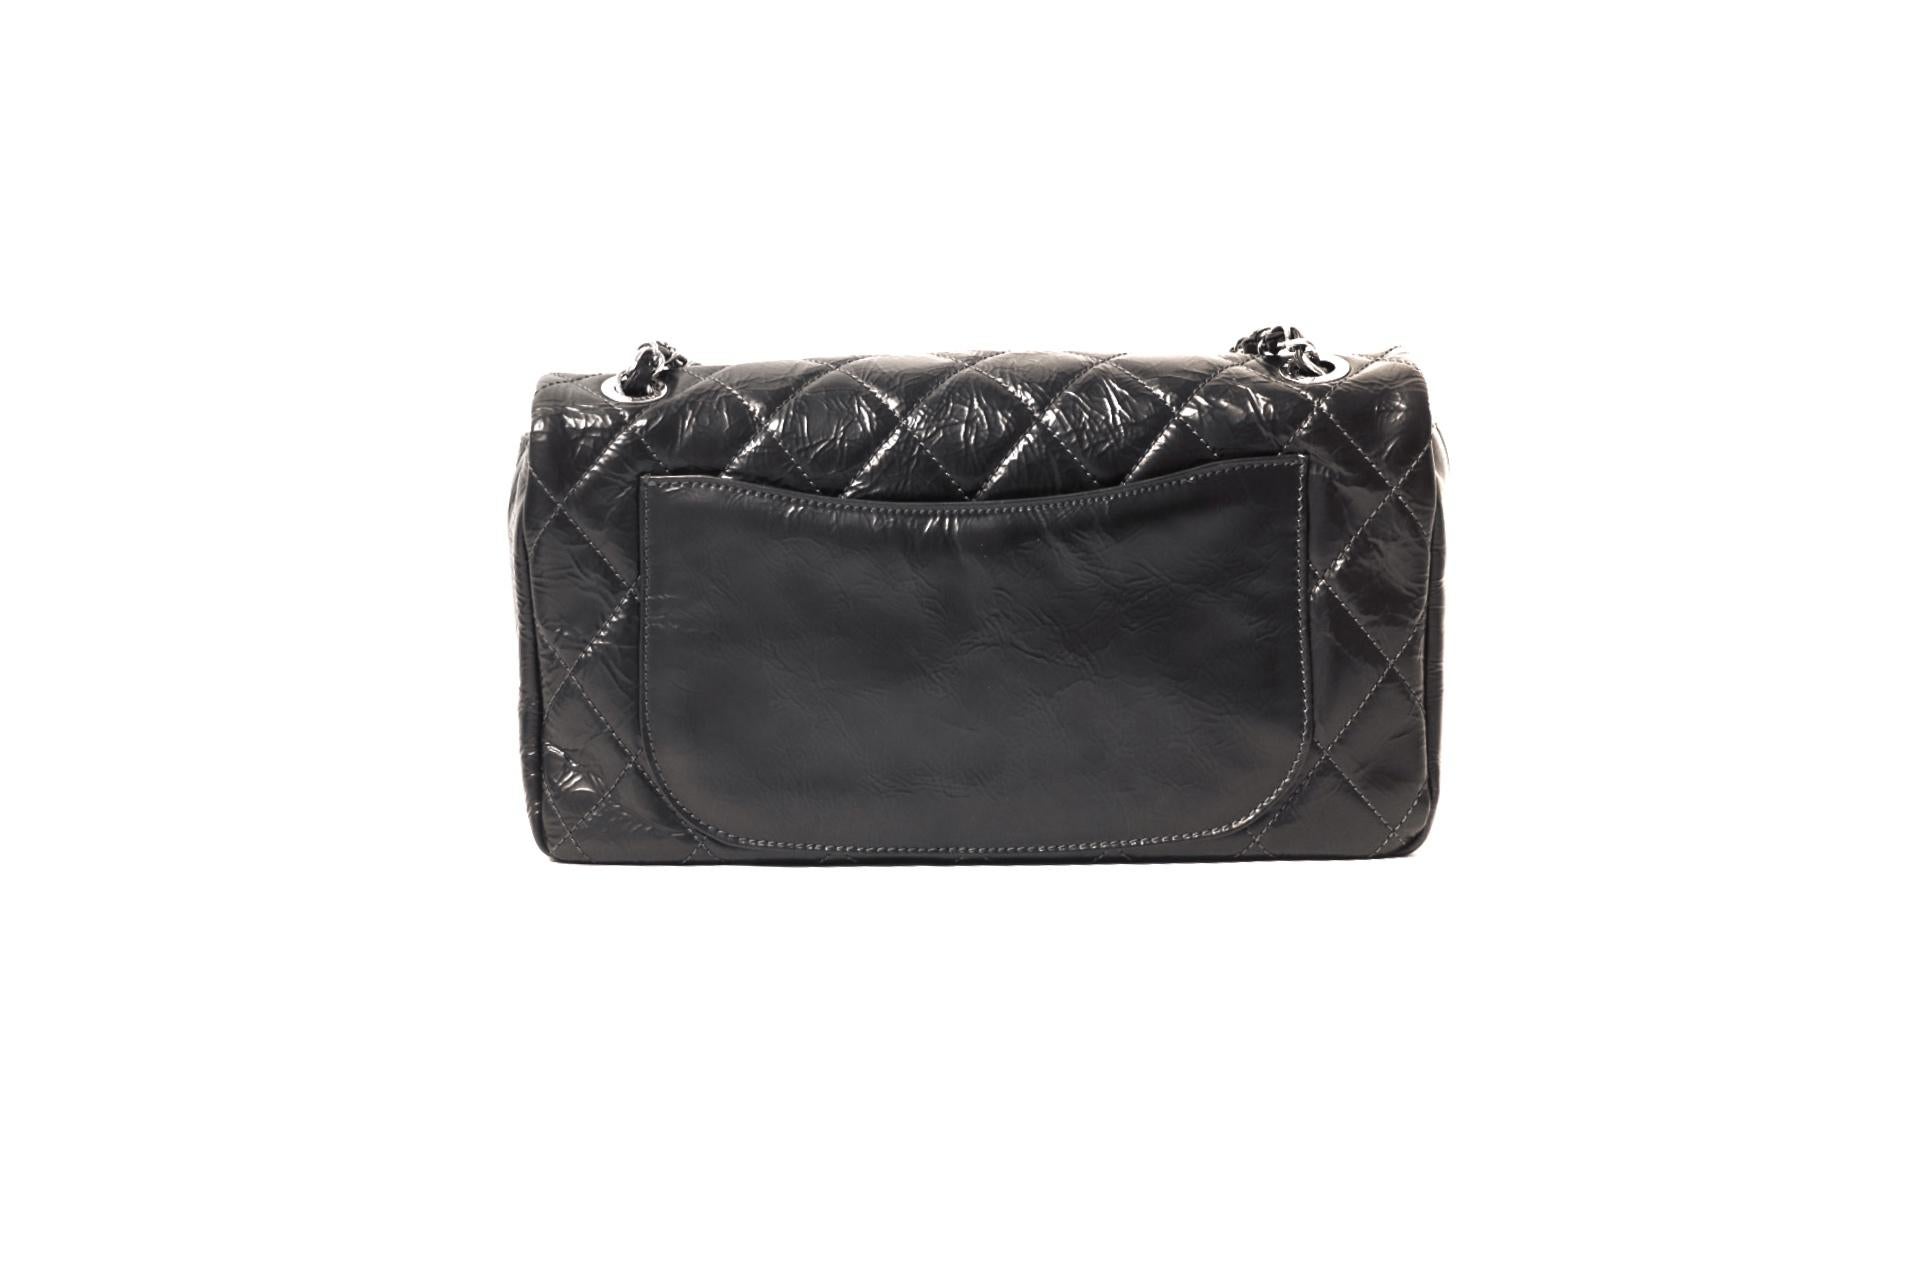 This authentic Chanel Black Leather Flap Bag is in pristine condition.  Perfectly scaled for year-round daily enjoyment, it is an excellent addition to any collection.
Black glazed leather has an intentionally distressed finish and is quilted in